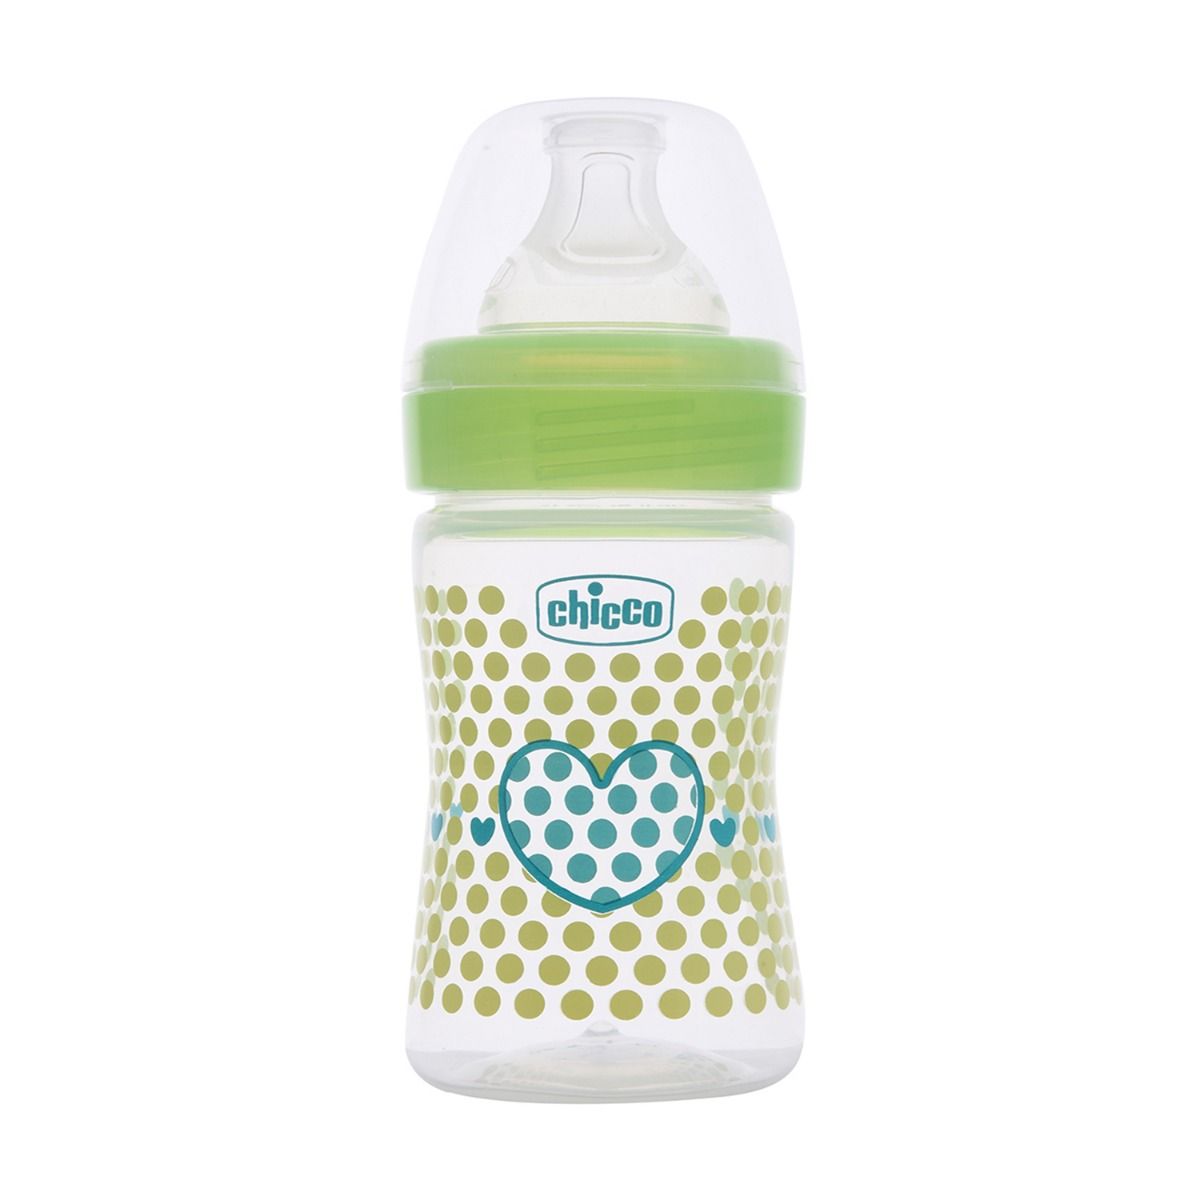 Chicco Well-Being Green Feeding Bottle, 150 ml, Pack of 1 